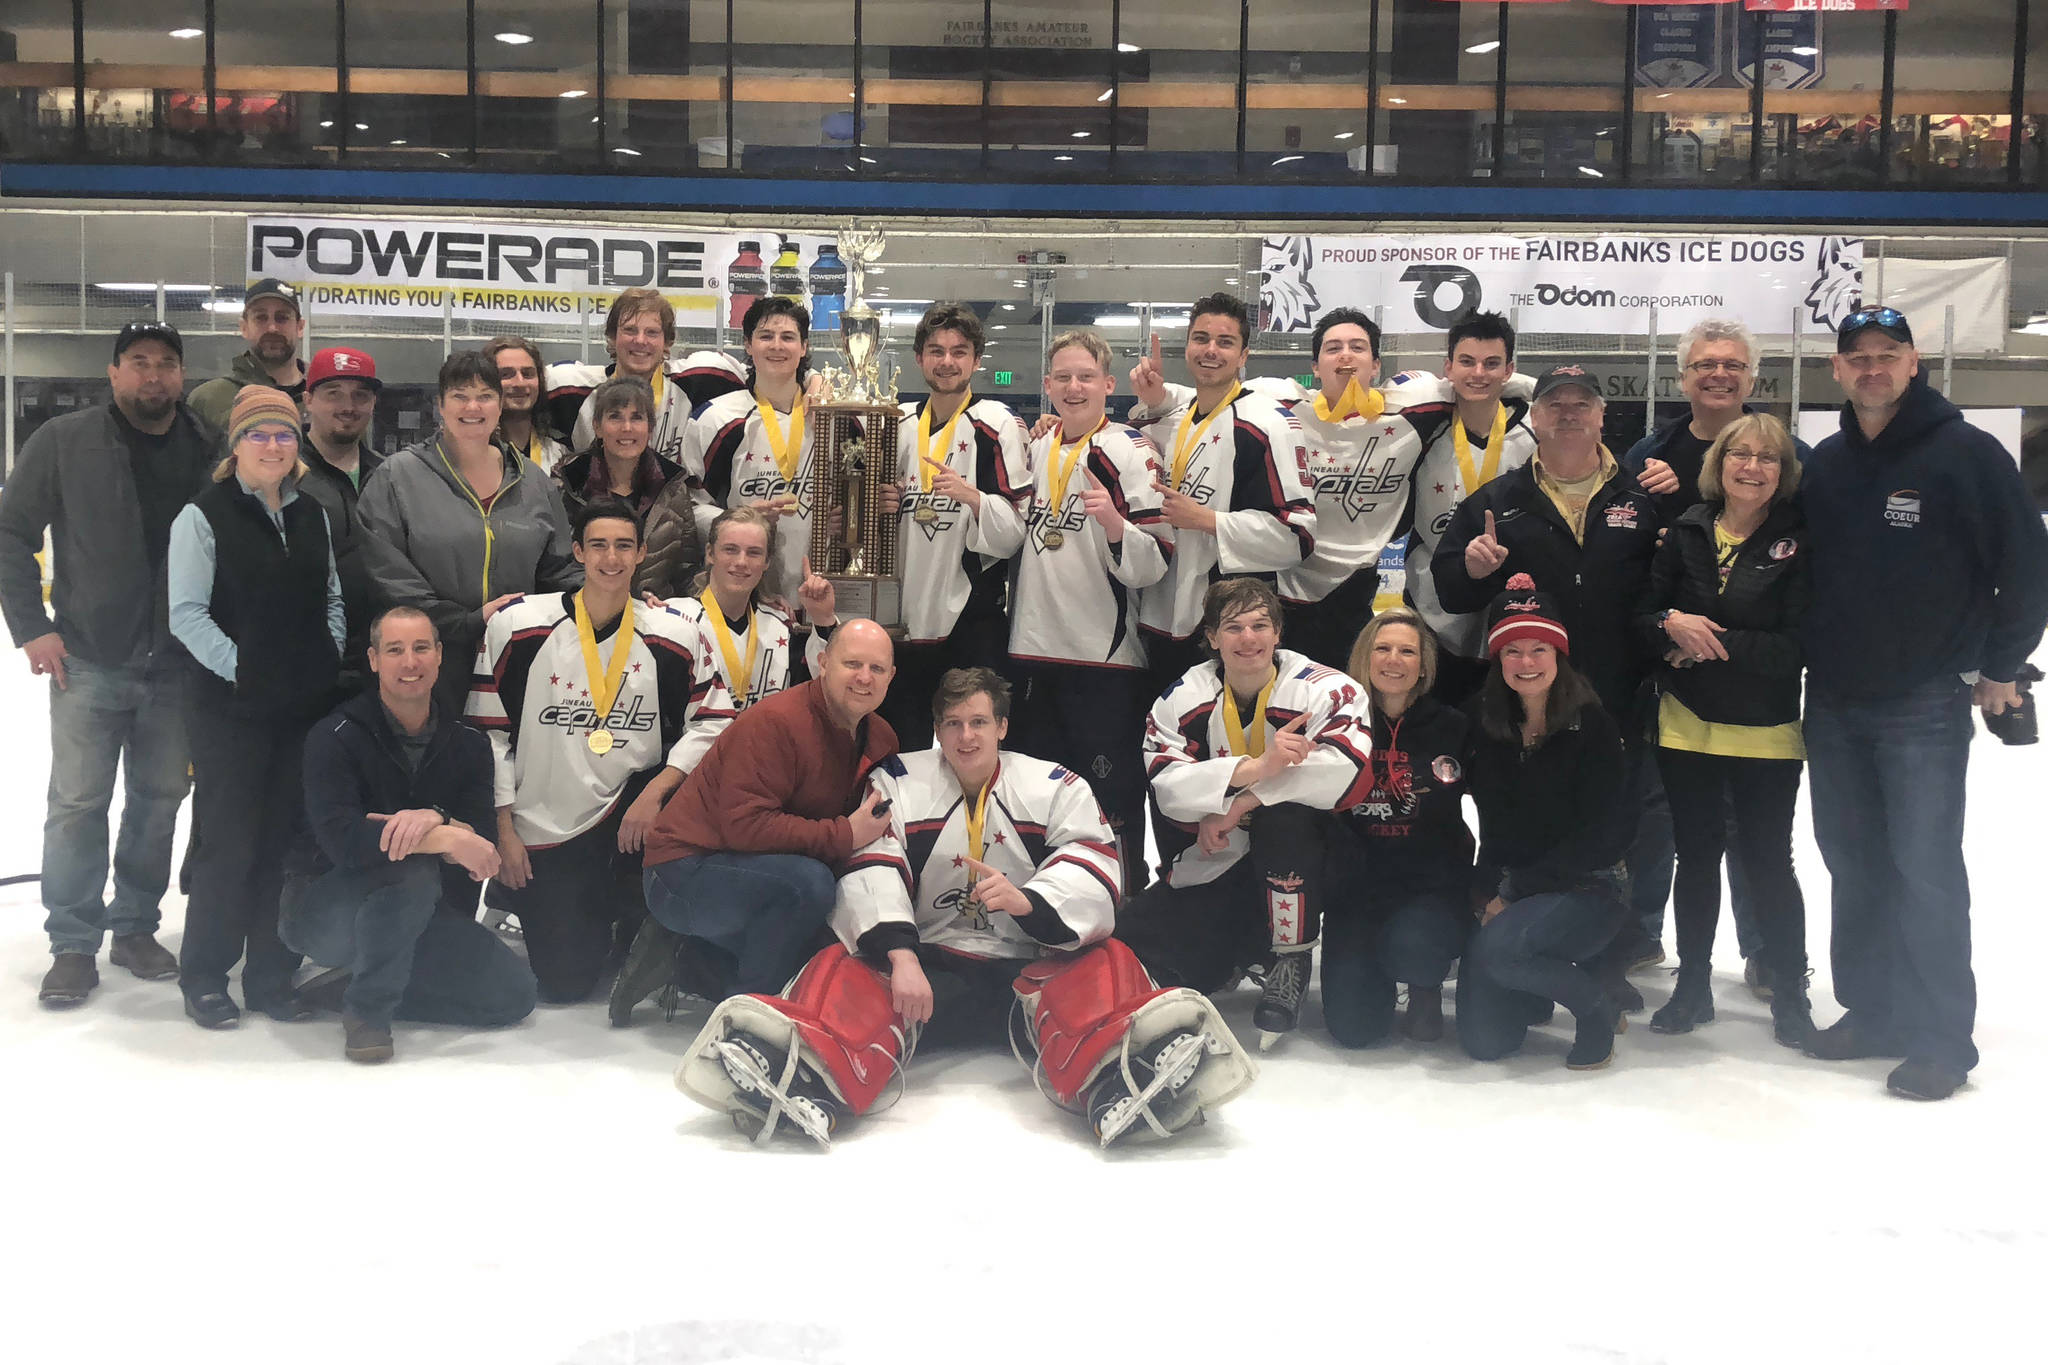 The Juneau Capitals 18U hockey team poses with family after winning the Alaska State Hockey Association Tier A state championship at the Big Dipper Ice Arena in Fairbanks on Sunday, March 24, 2019. The Capitals defeated the Alaska Heat 5-3 in the title game to round out a 5-0 showing at the tournament. (Courtesy Photo | Ian Leary)